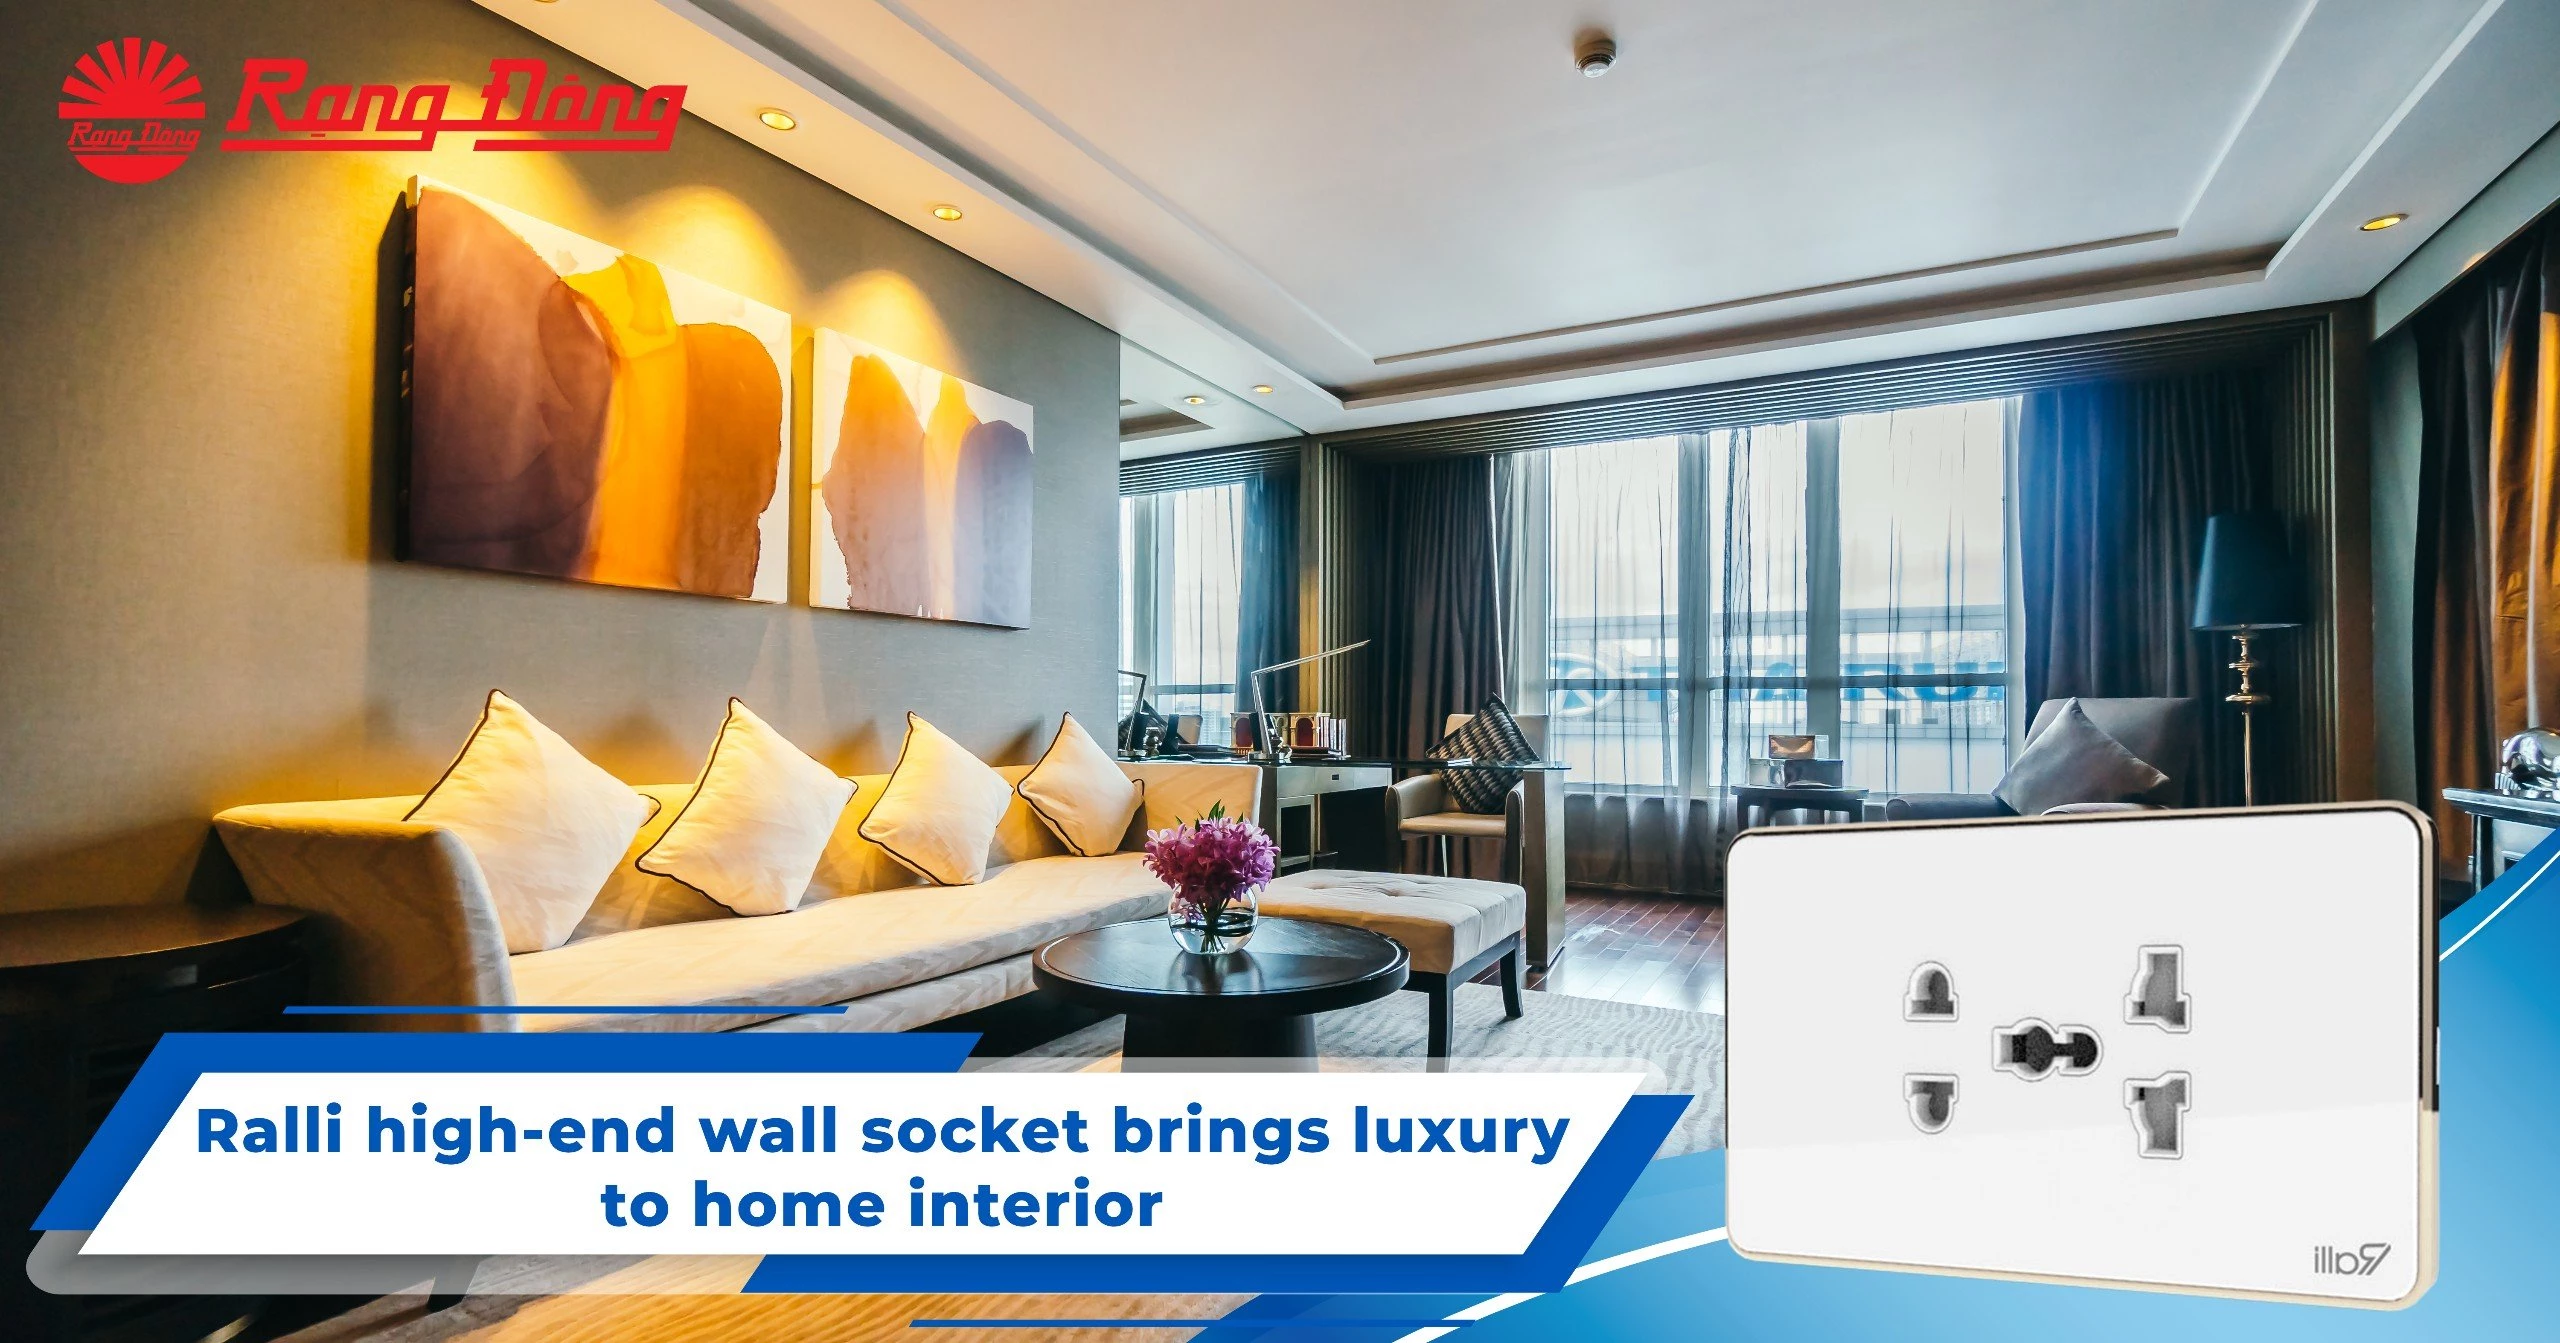 Ralli high-end wall socket brings luxury to home interior